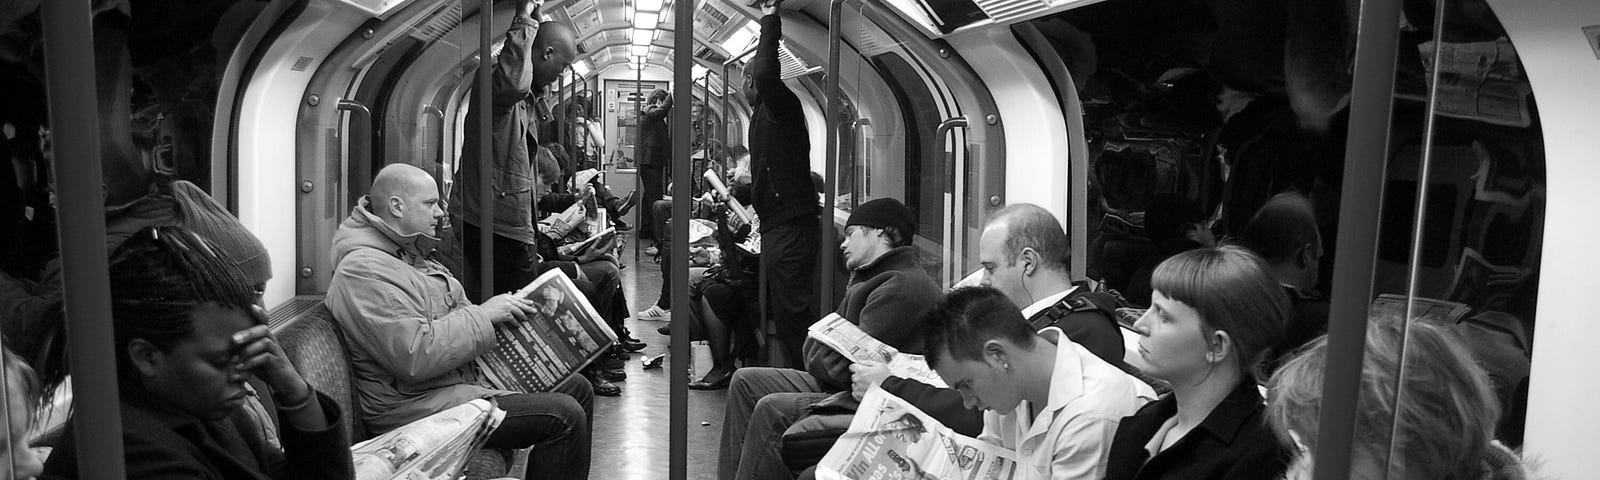 Black and white photo of a tube carriage filled with people sitting and reading newspapers